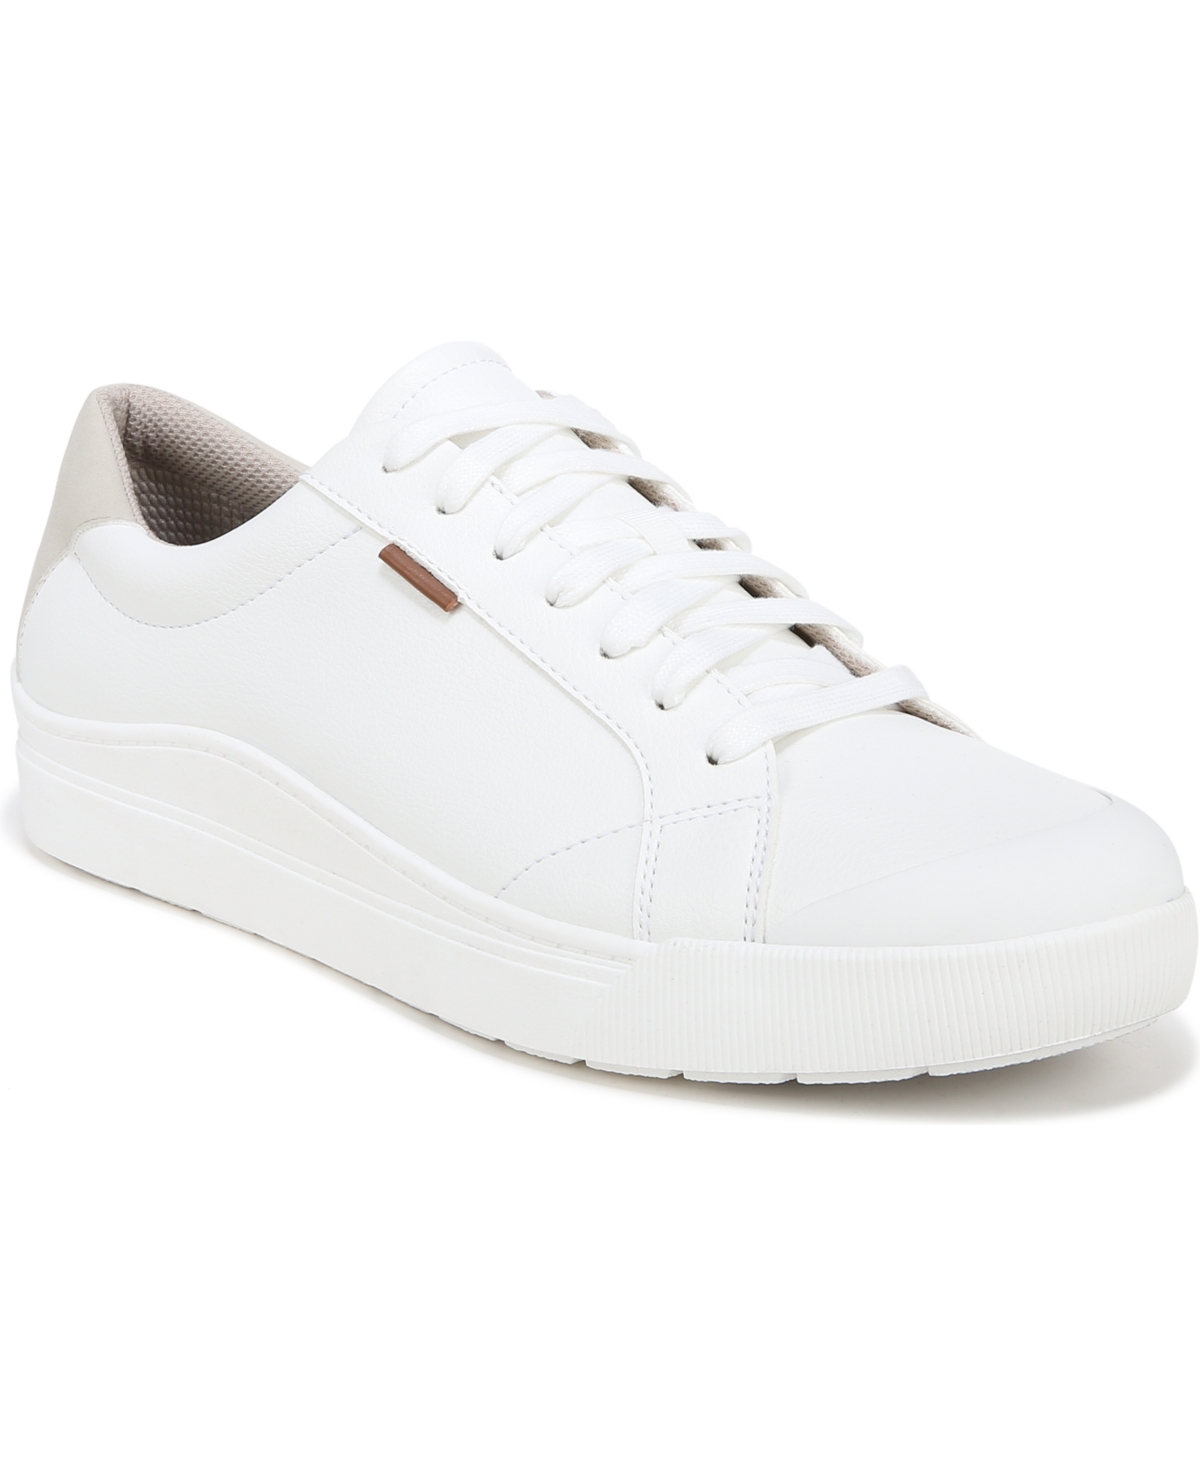 Men's Time Off Lace Up Sneakers - White